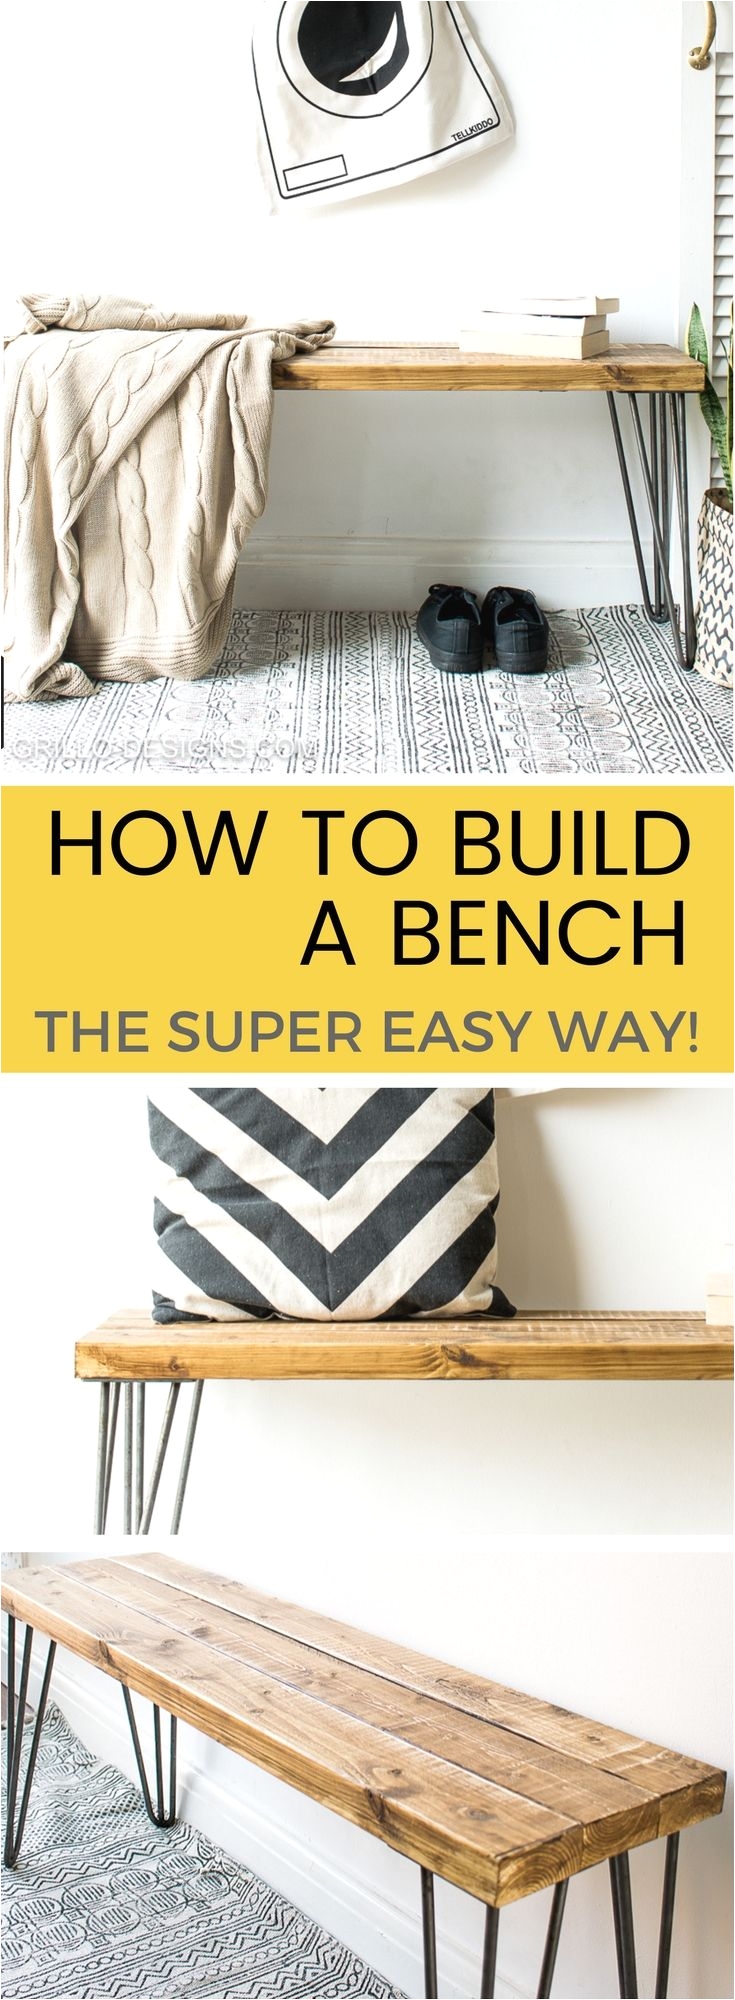 how to build a bench the super easy way diy furniture